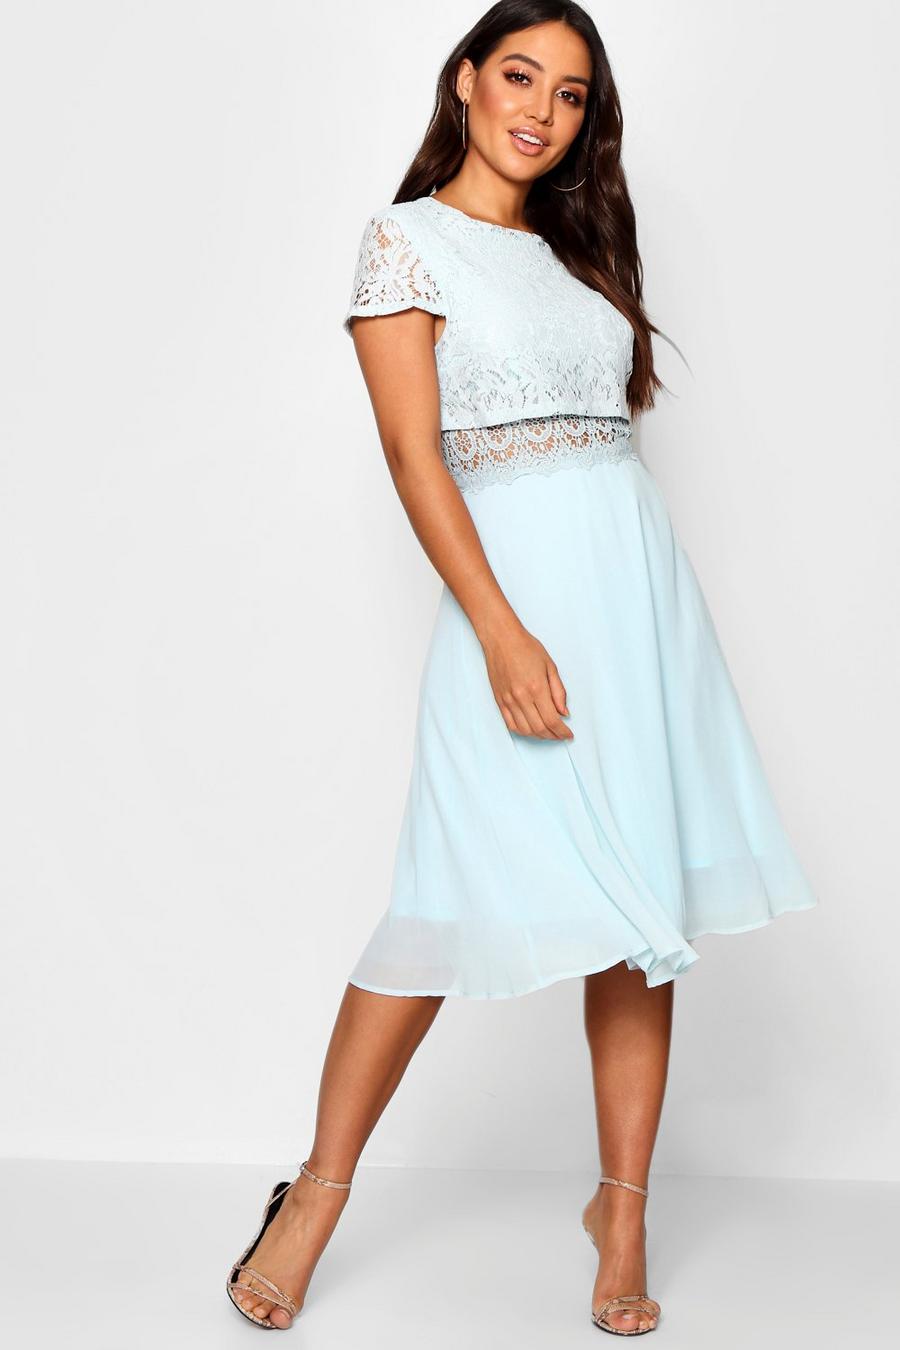 Sky Lace Top Chiffon Skater Dress image number 1